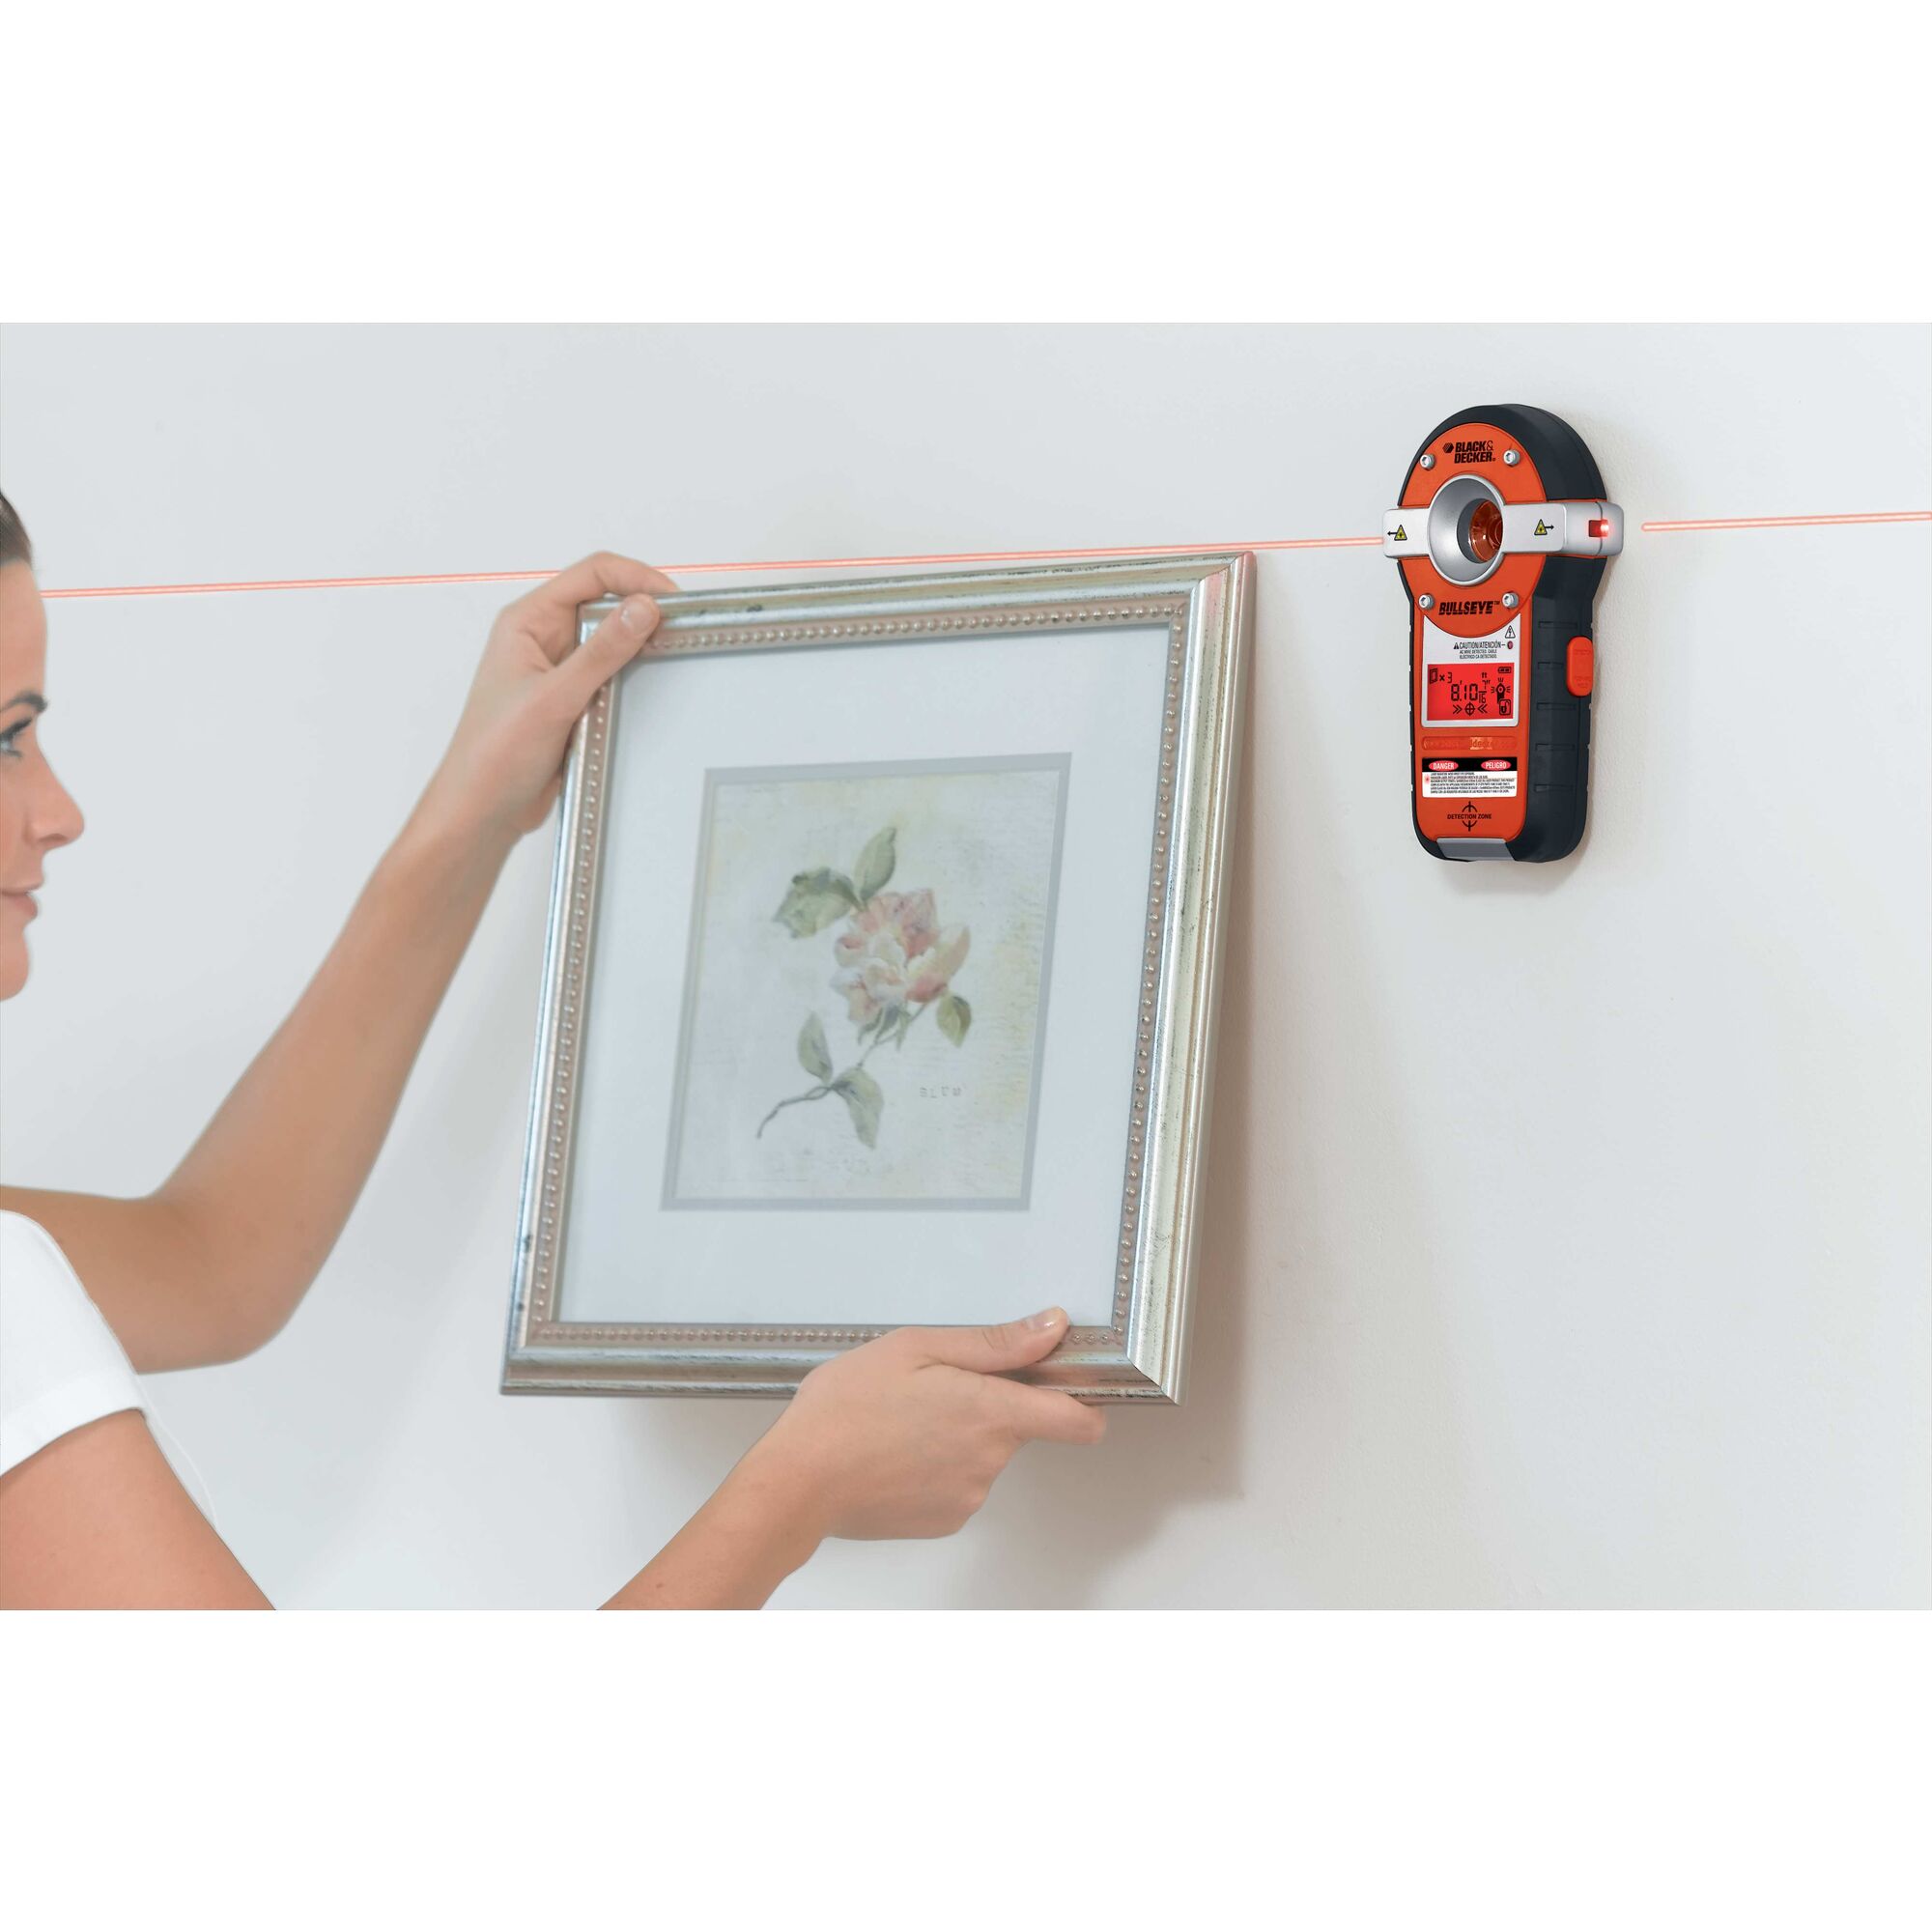 BullsEye Auto Leveling Laser with Stud Sensor being used by person to hang picture frame on wall.